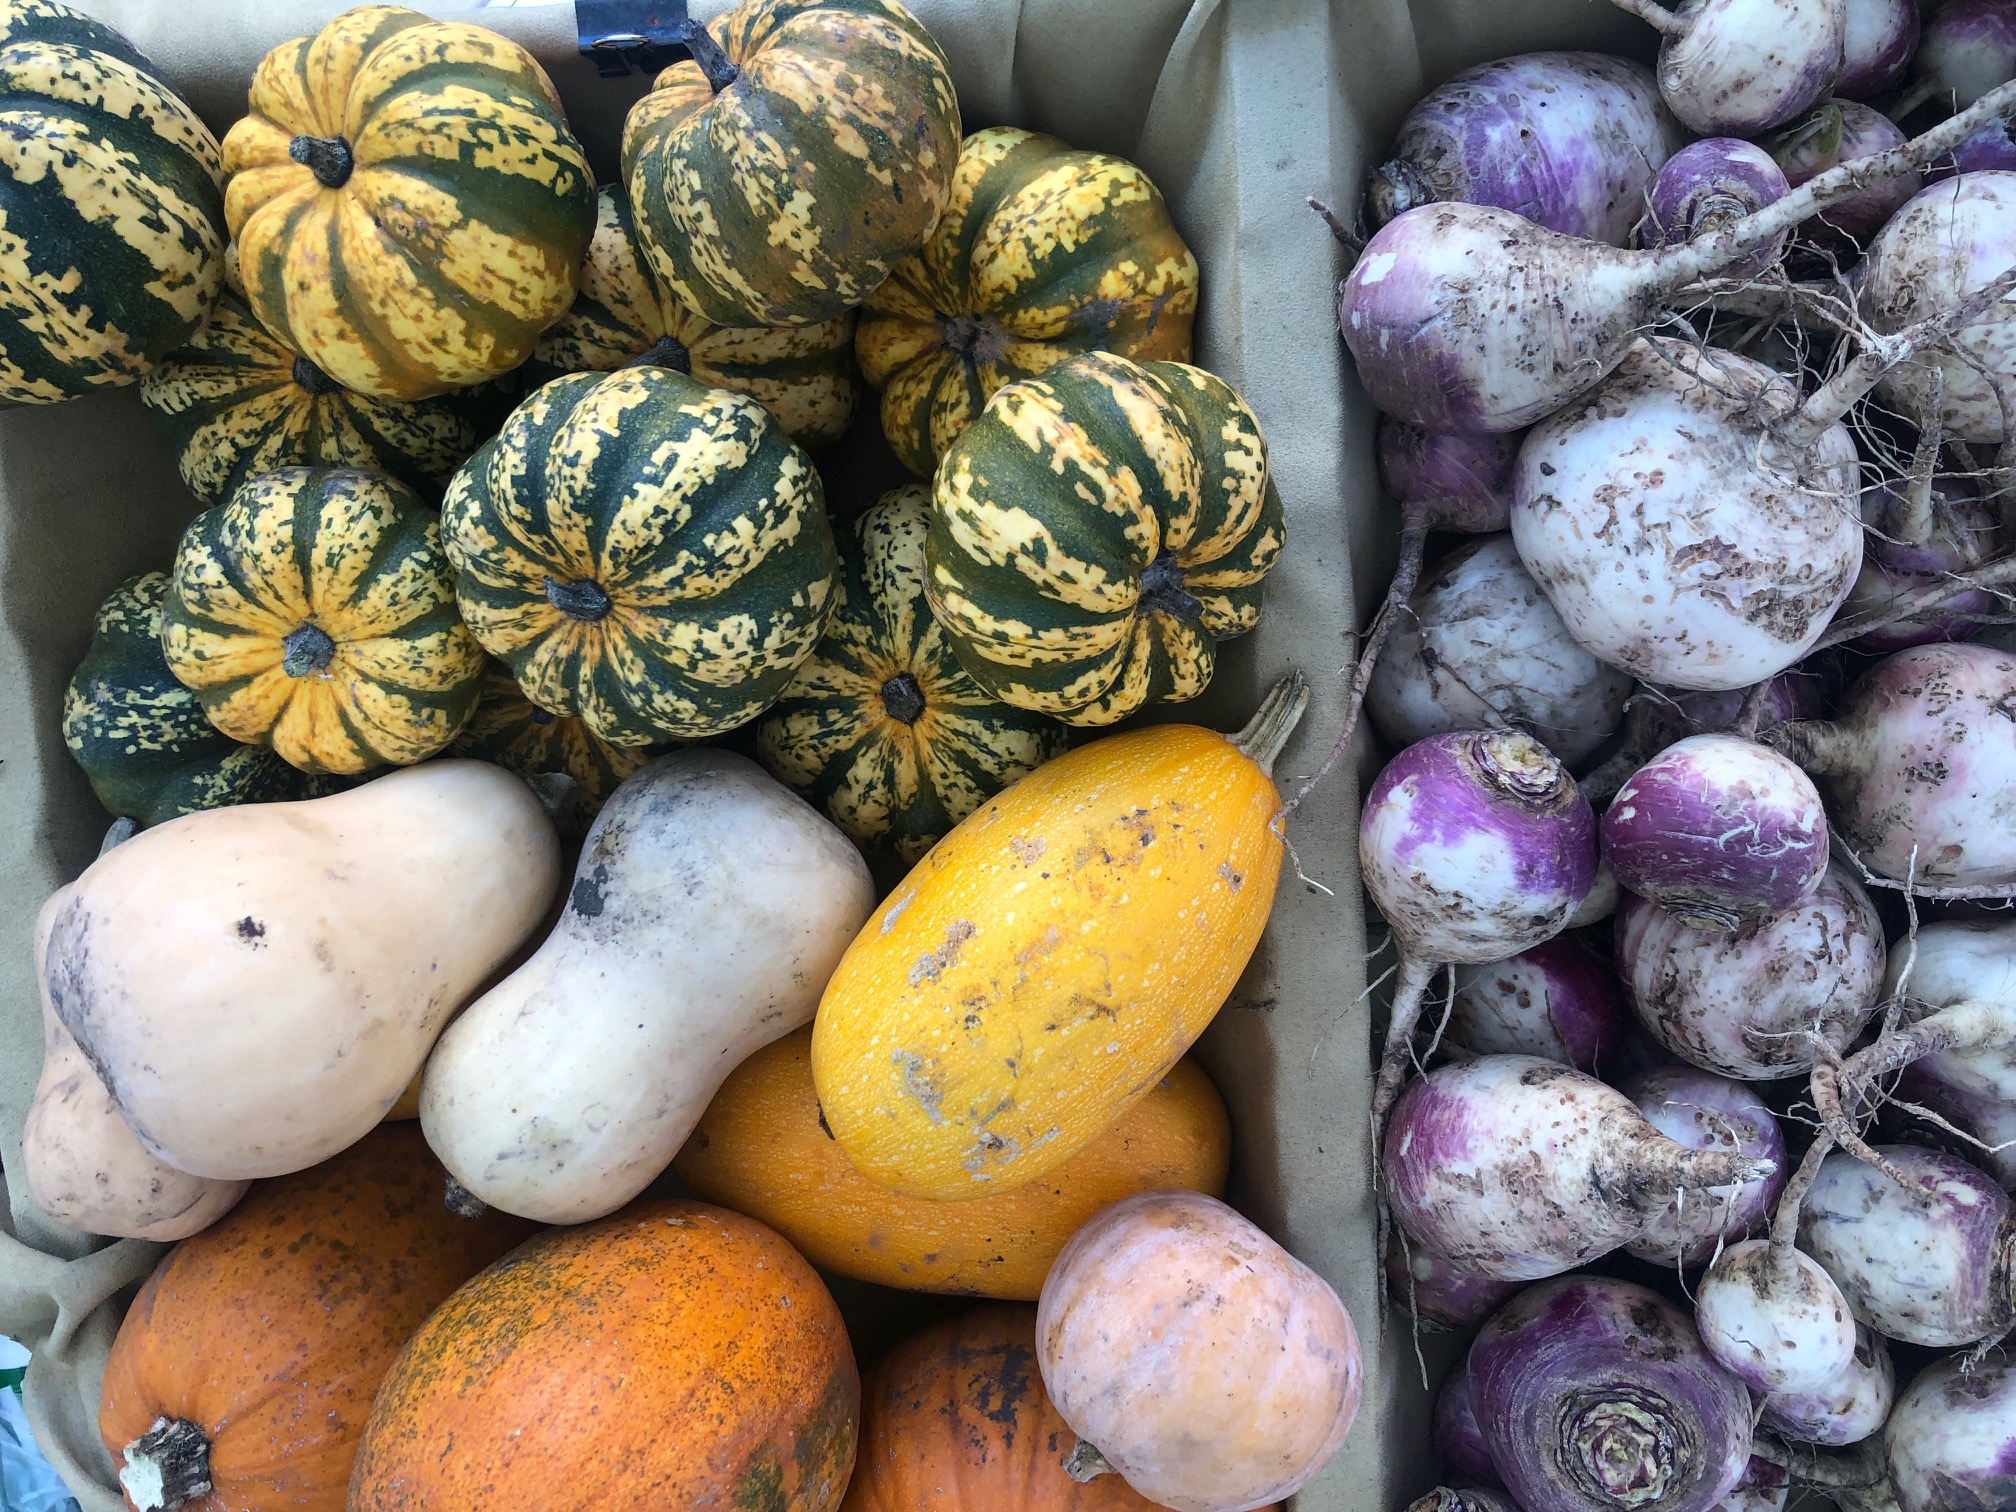 An overhead photo shows a burlap lined basket with butternut squash, pumpkings, and colorful acorn squash. Photo by Alyssa Buckley.